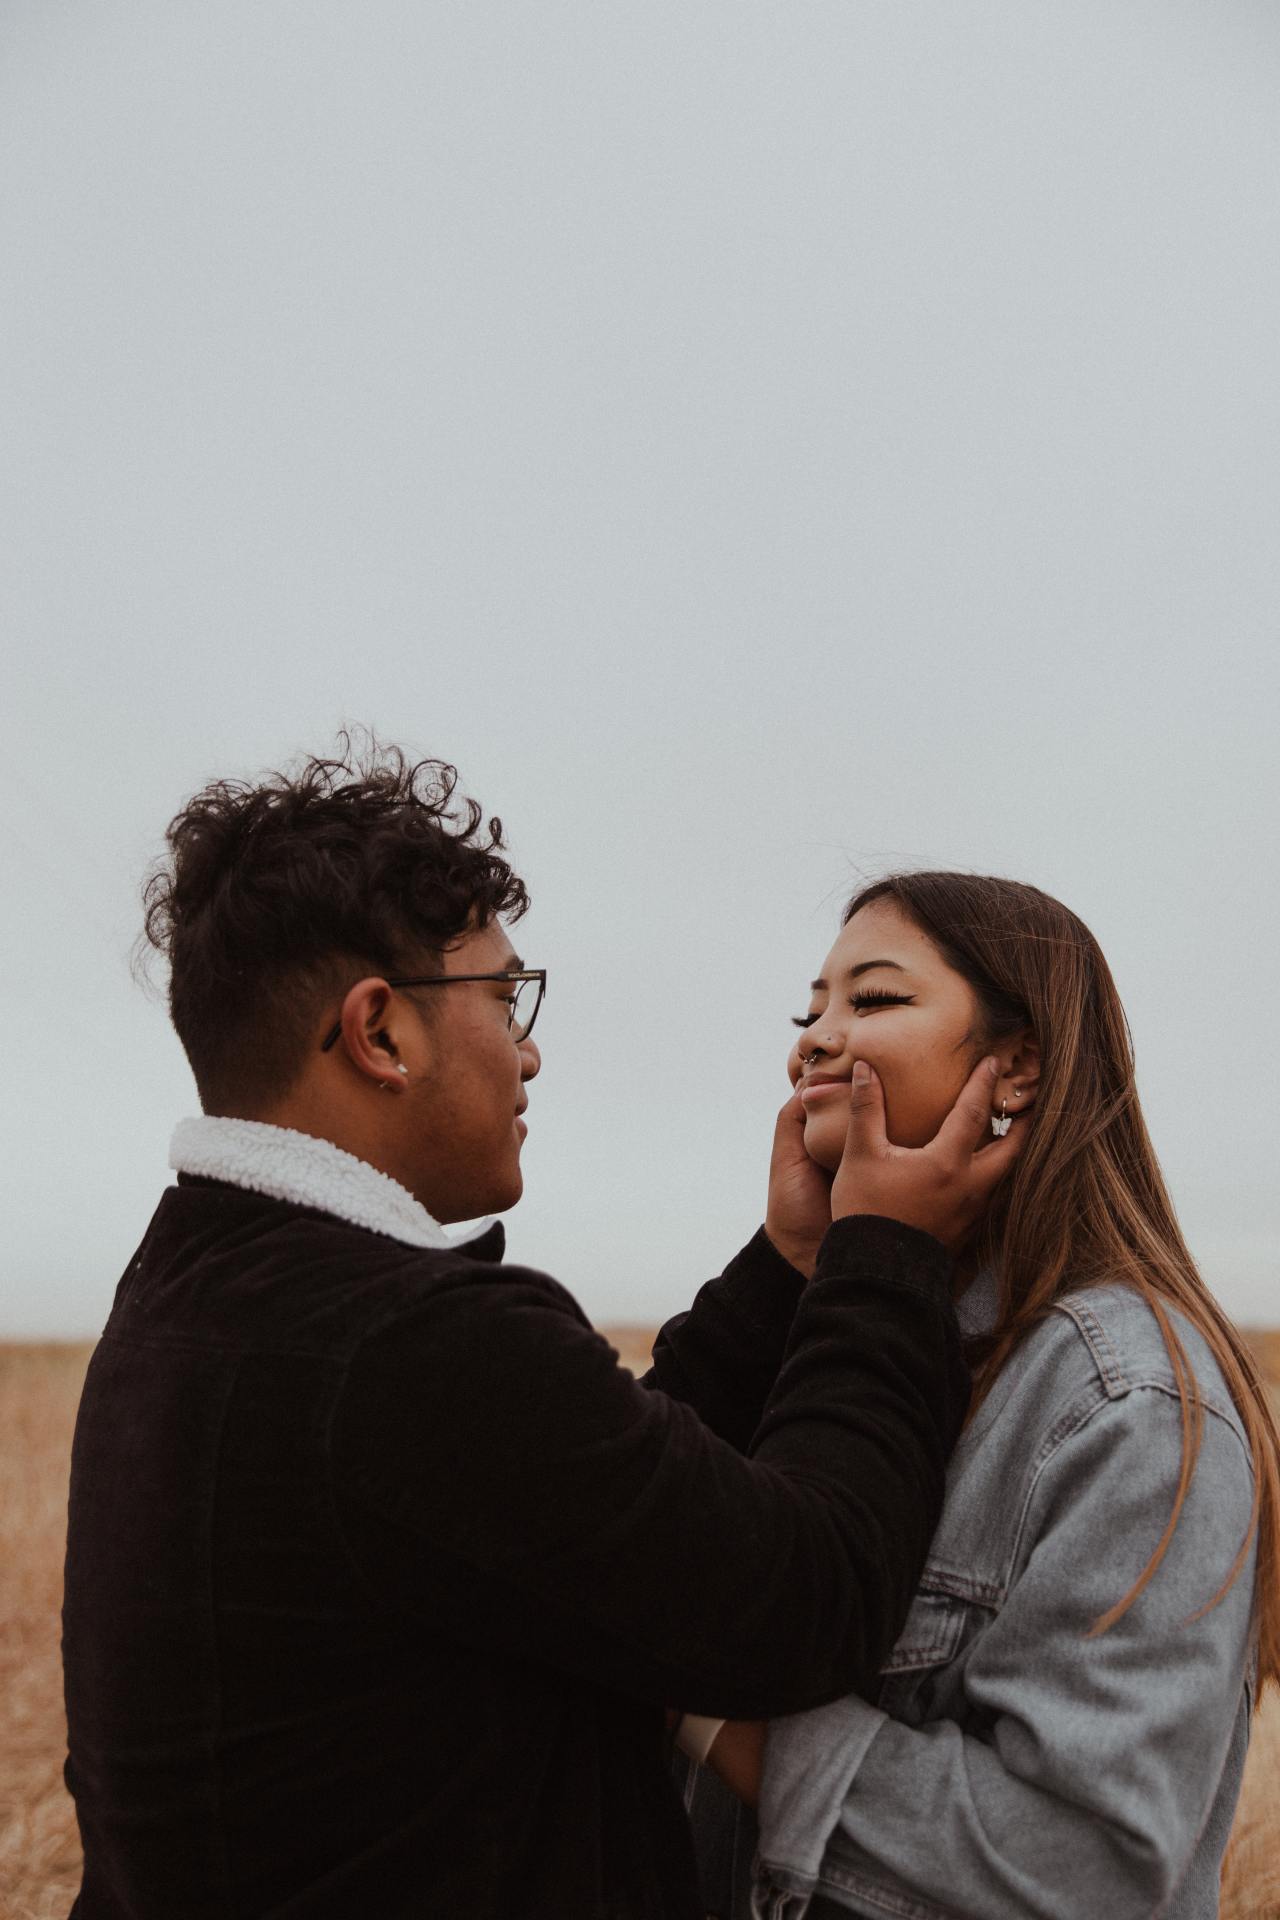 17 Men Reveal The Most Adorable Thing Their Girlfriends Do That They Can’t Get Enough Of